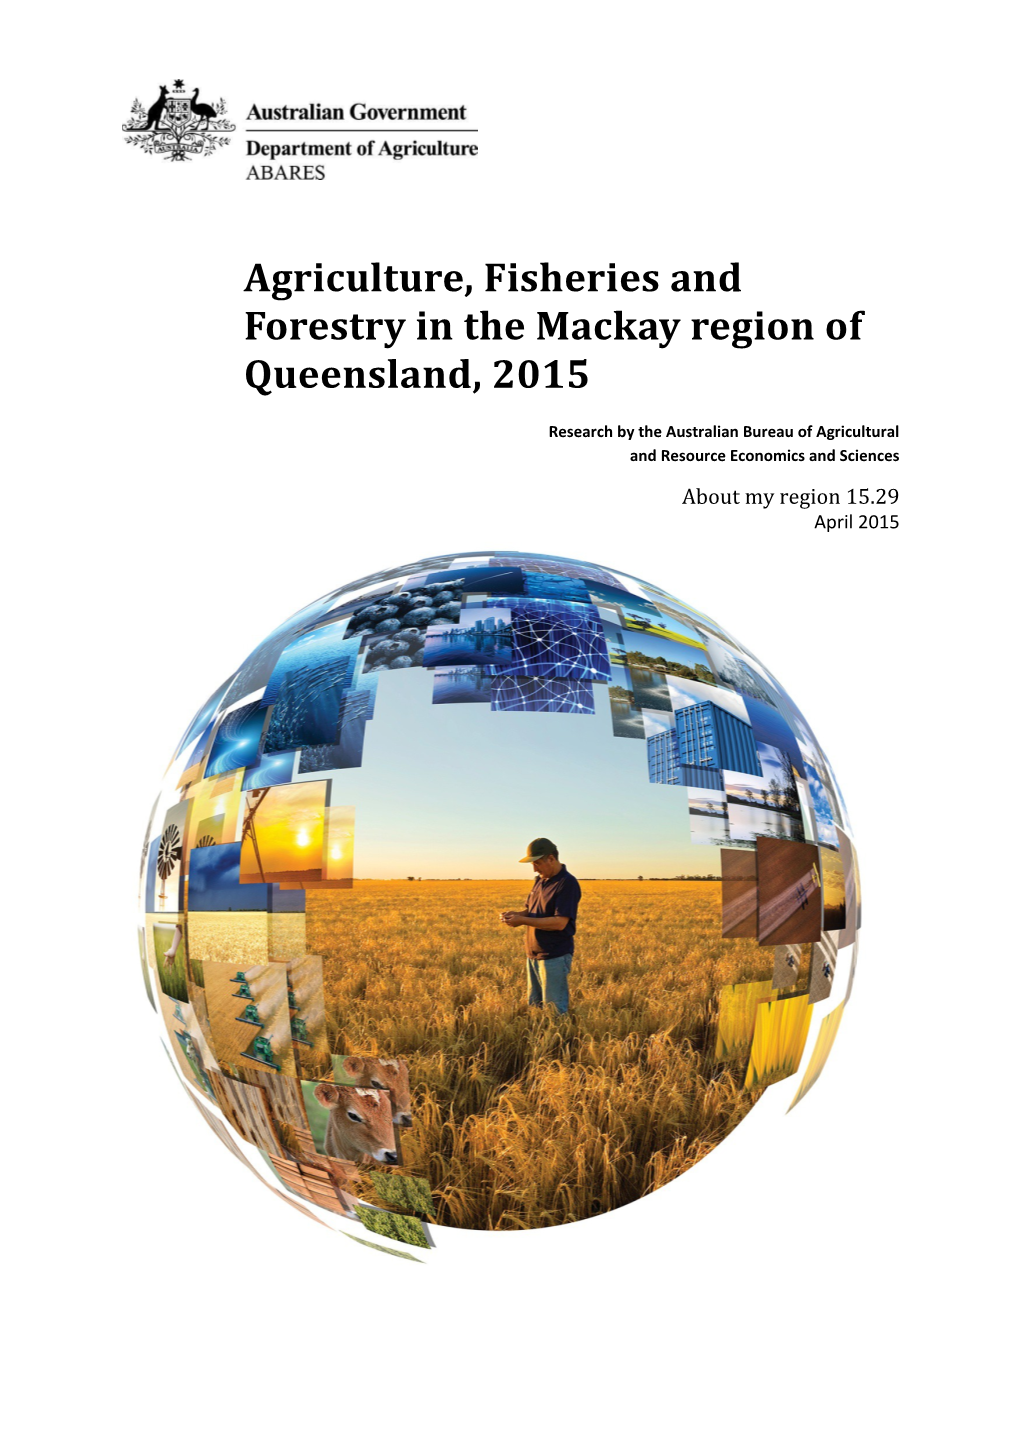 Agriculture, Fisheries and Forestry in the Mackay Region of Queensland, 2015